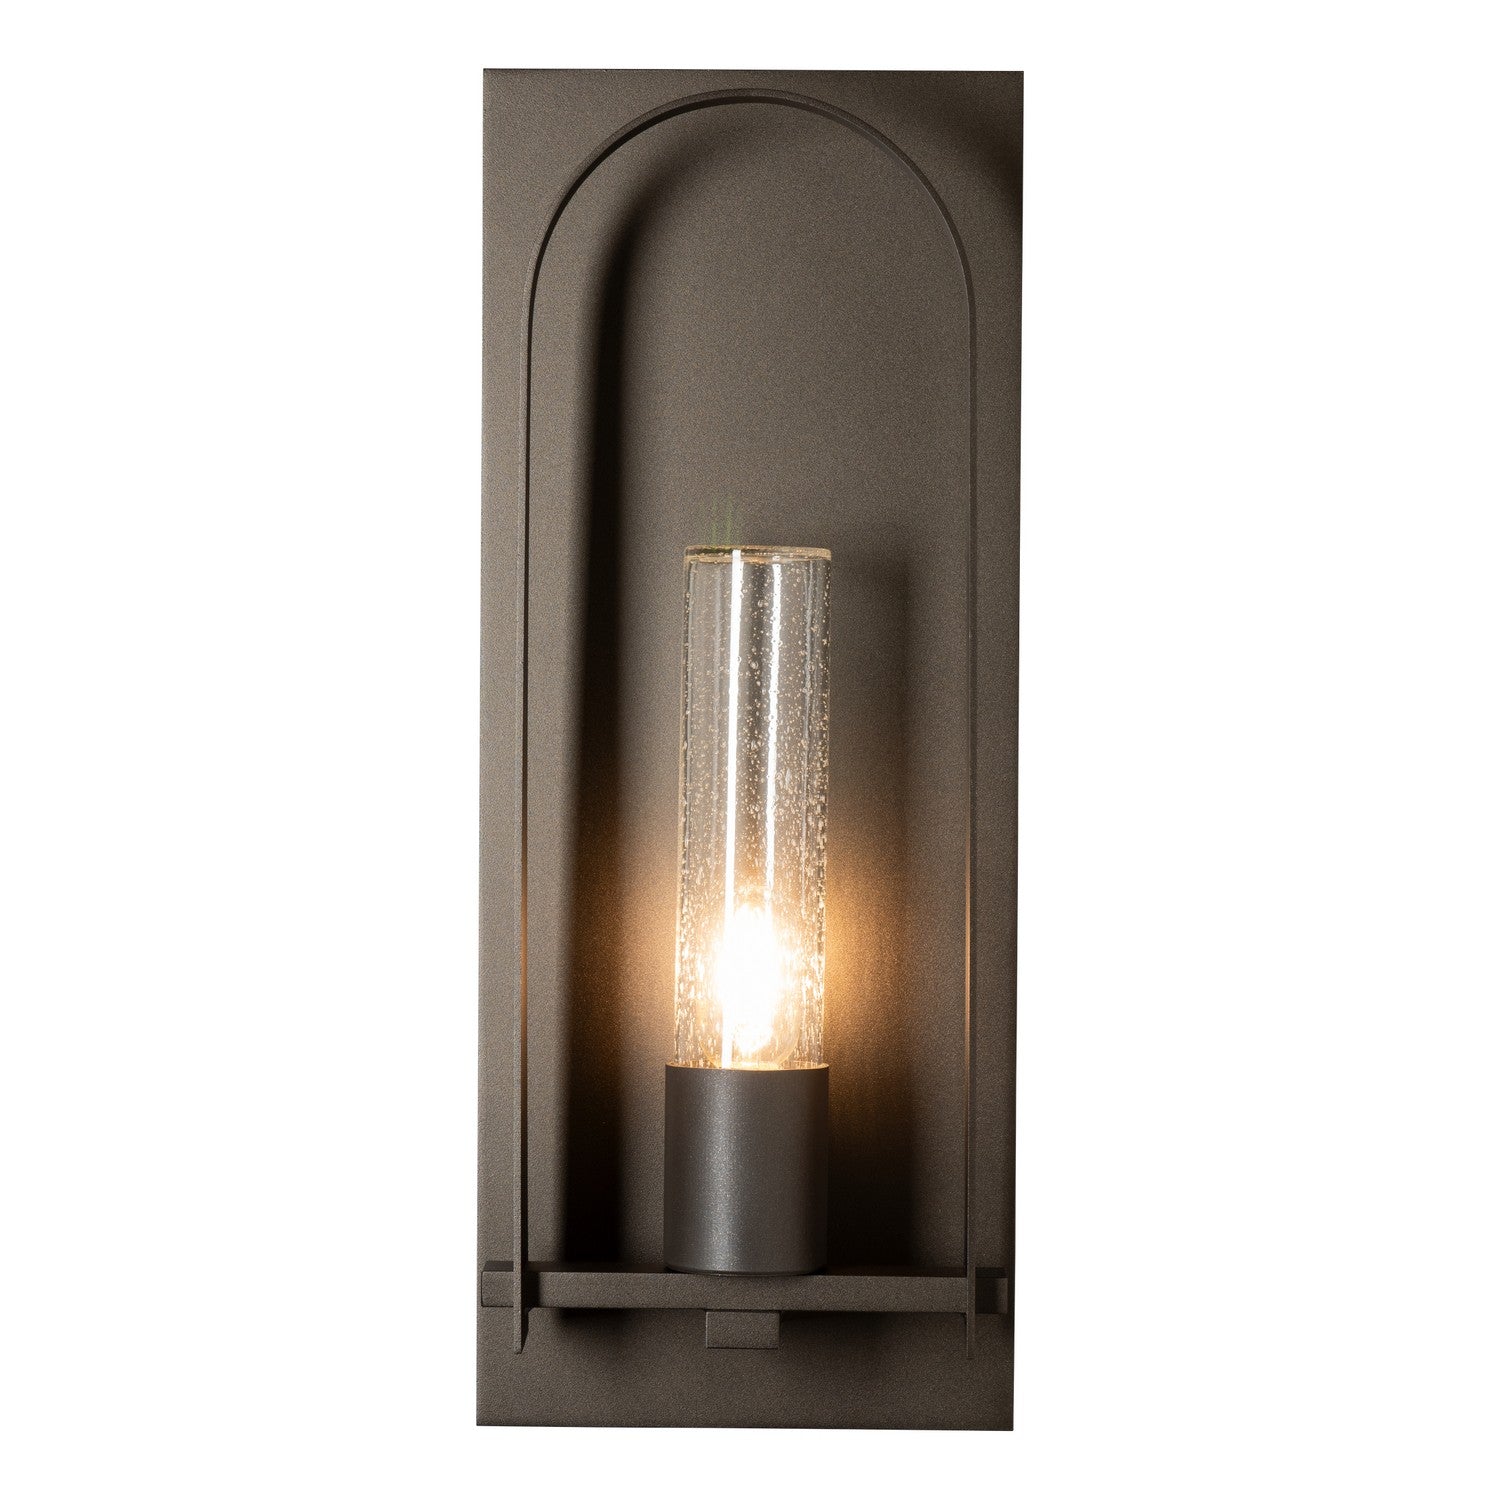 Hubbardton Forge - One Light Outdoor Wall Sconce - Triomphe - Oil Rubbed Bronze- Union Lighting Luminaires Decor